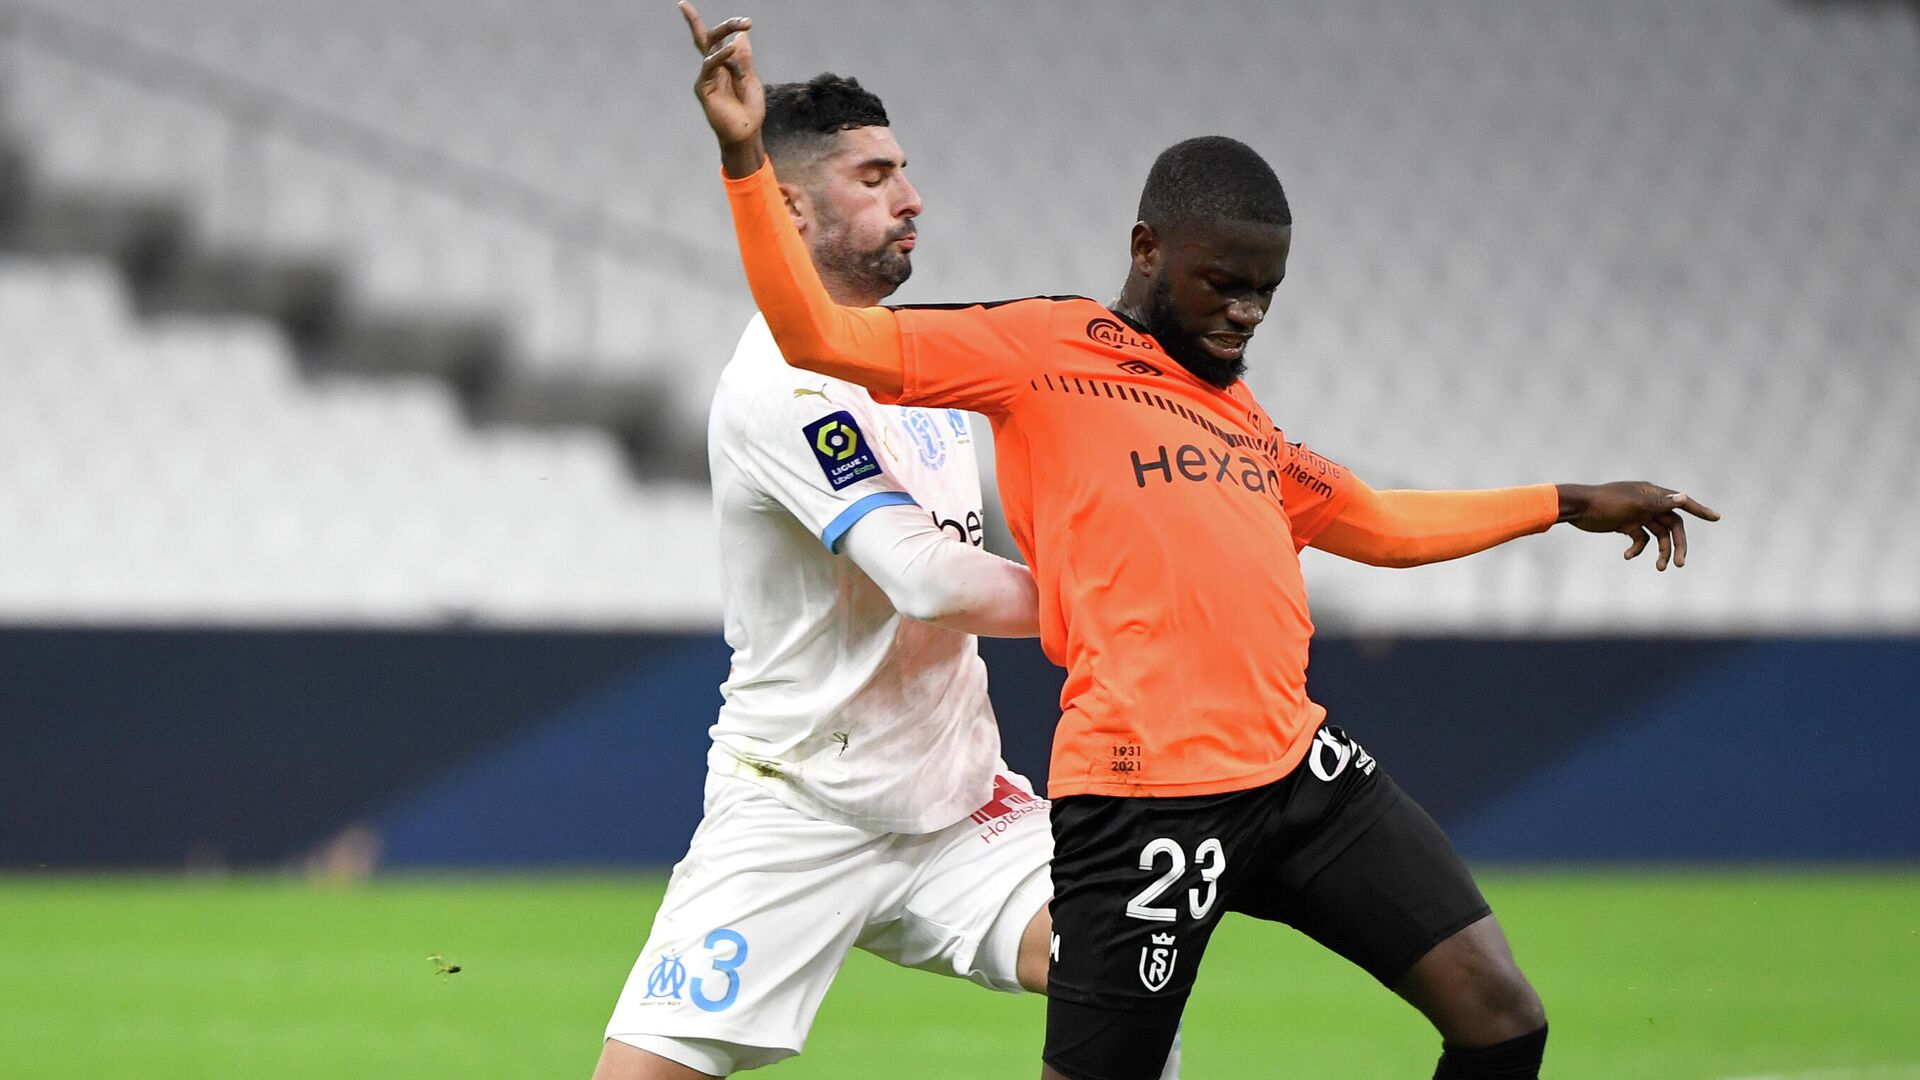 Marseille's Spanish defender Alvaro Gonzalez (L) fights for the ball with Reims' Bissau-Guinean midfielder Moreto Cassama during the French L1 football match between Olympique de Marseille (OM) and Reims at the Velodrome Stadium in Marseille, southeastern France, on December 19, 2020. (Photo by NICOLAS TUCAT / AFP) - РИА Новости, 1920, 19.12.2020